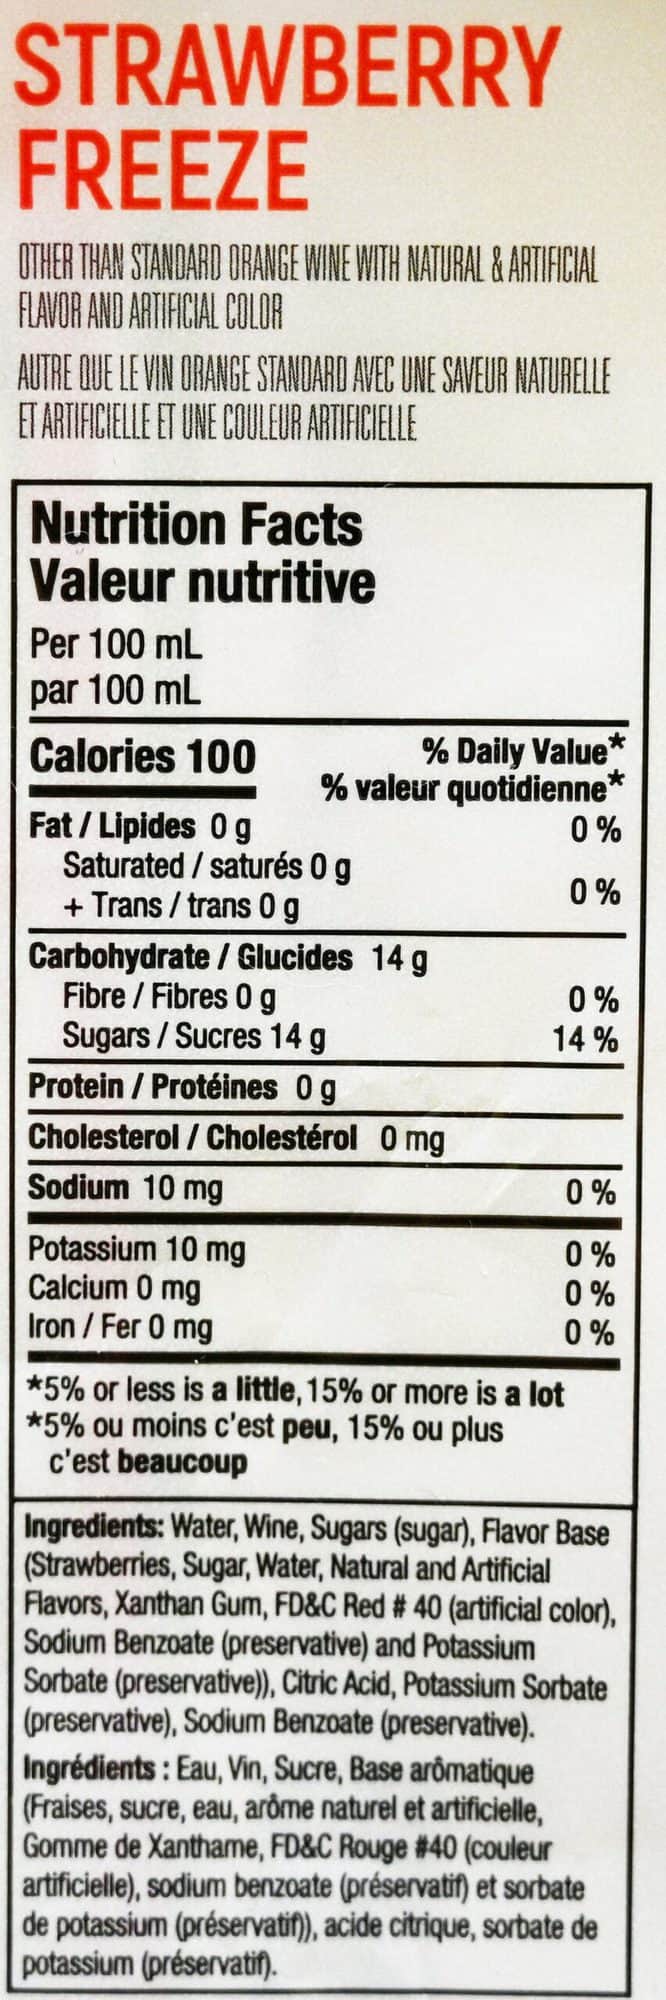 Strawberry nutrition facts and ingredients label. 